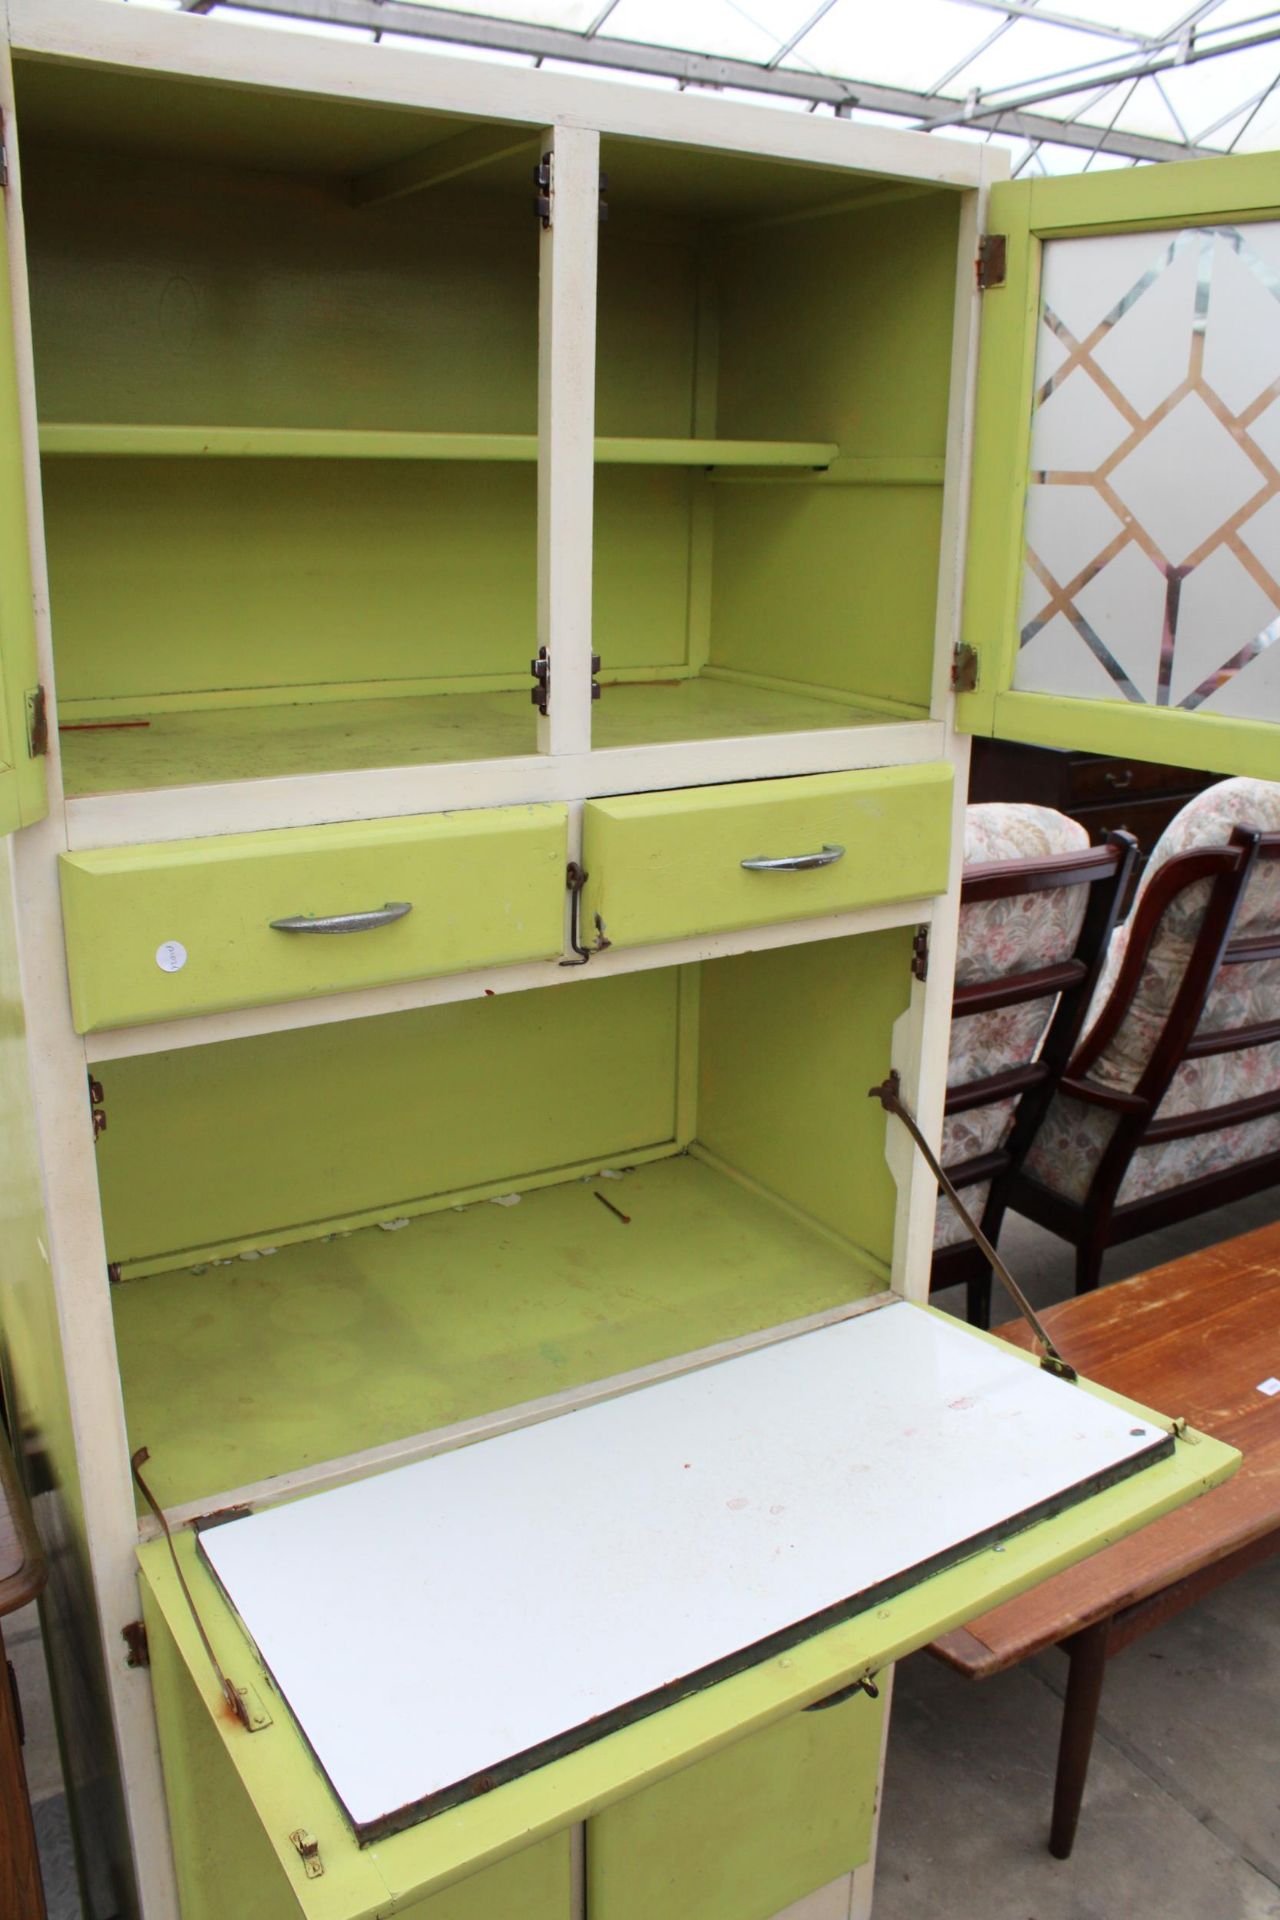 A 1950'S KITCHEN DRESSER WITH DROP DOWN FRONT WITH ENAMEL WORK SURFACE 30" WIDE - Image 2 of 2